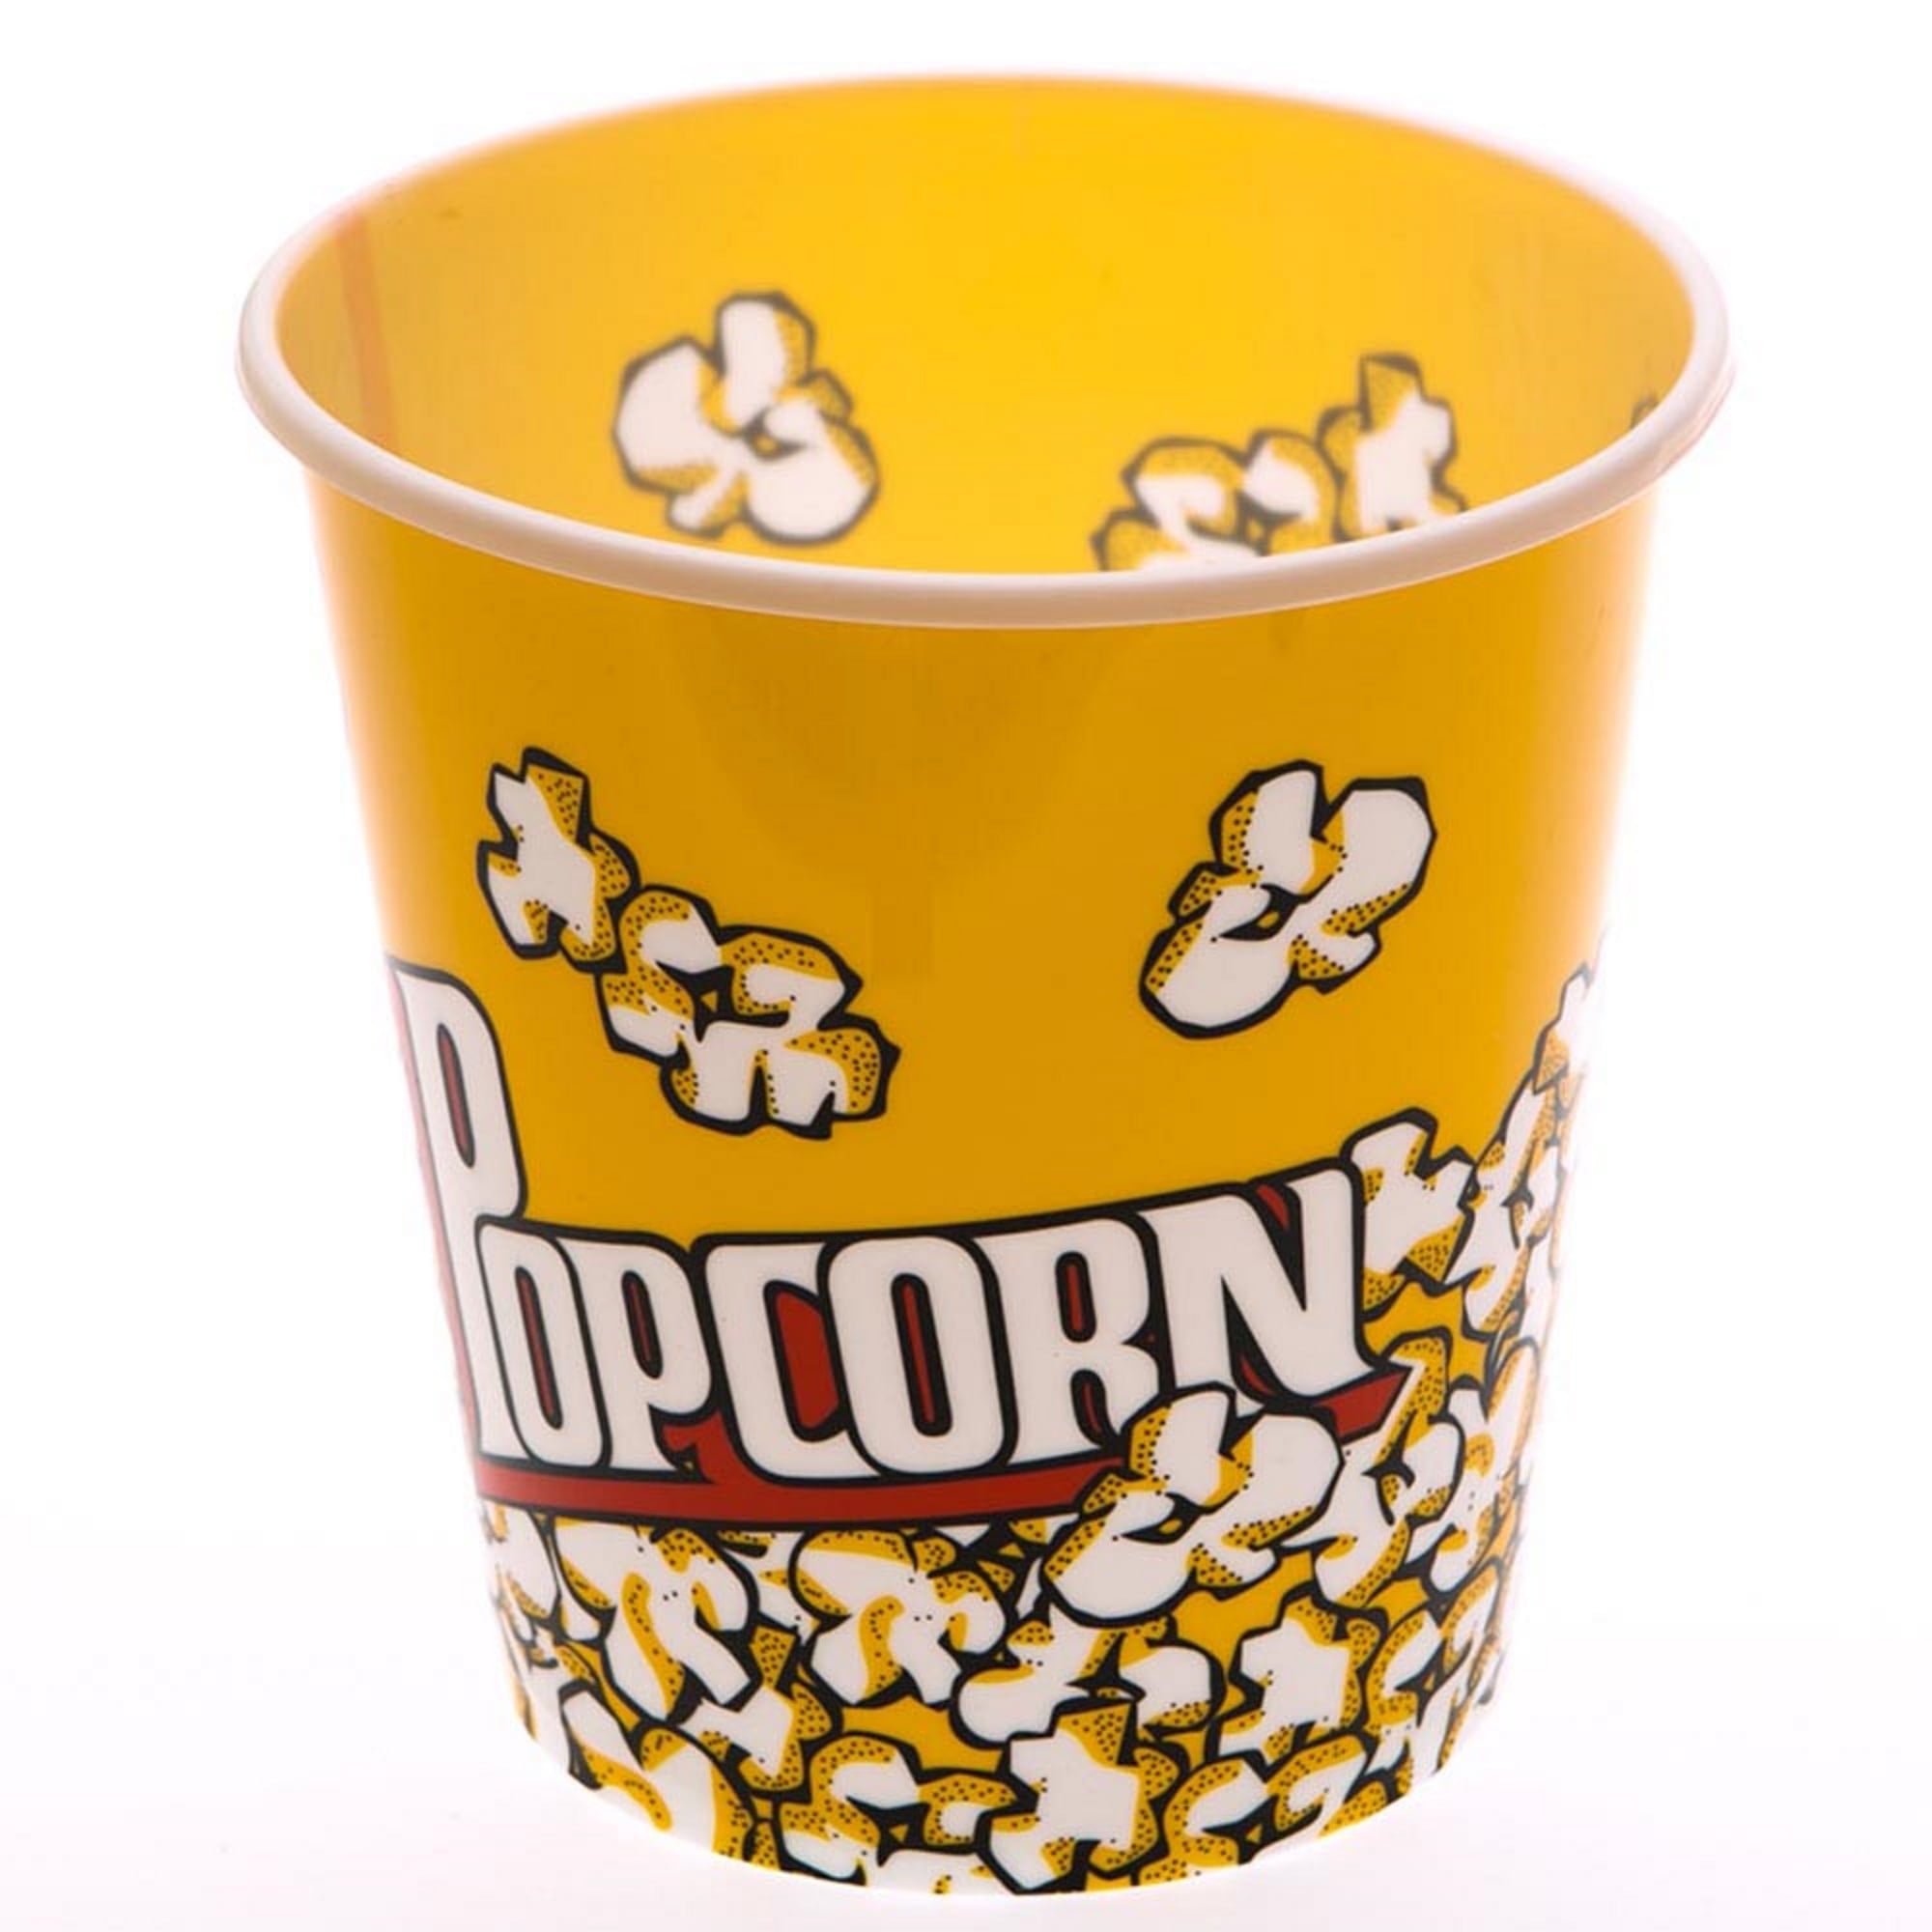 All Quantities and Sizes Wholesale Boxes! Cinema Style Popcorn Buckets 